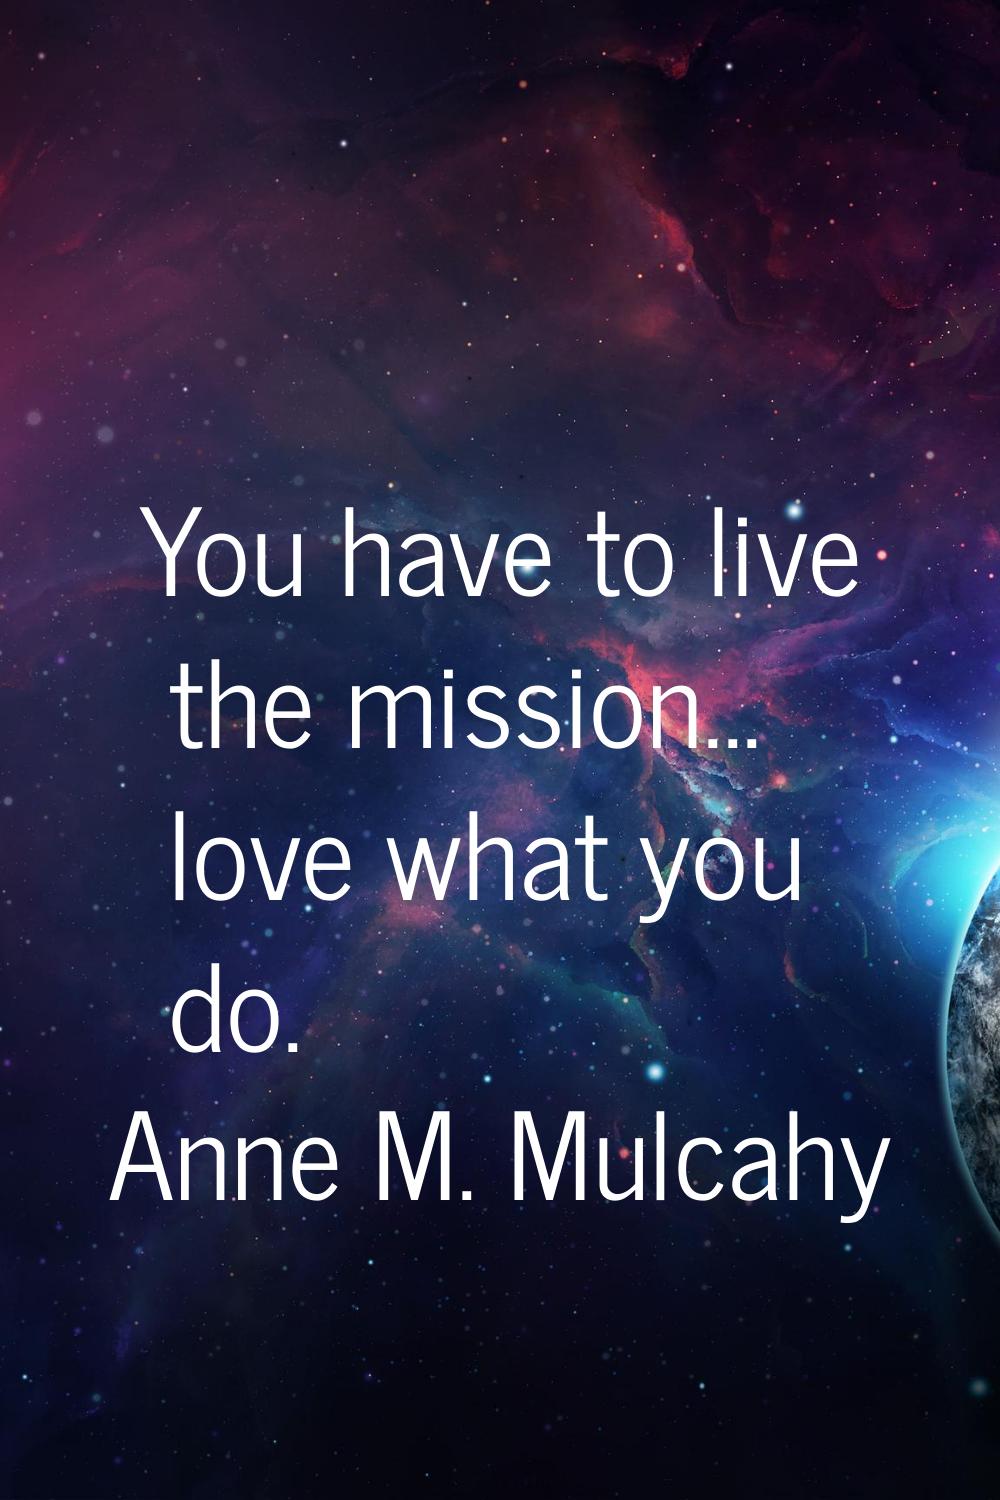 You have to live the mission... love what you do.